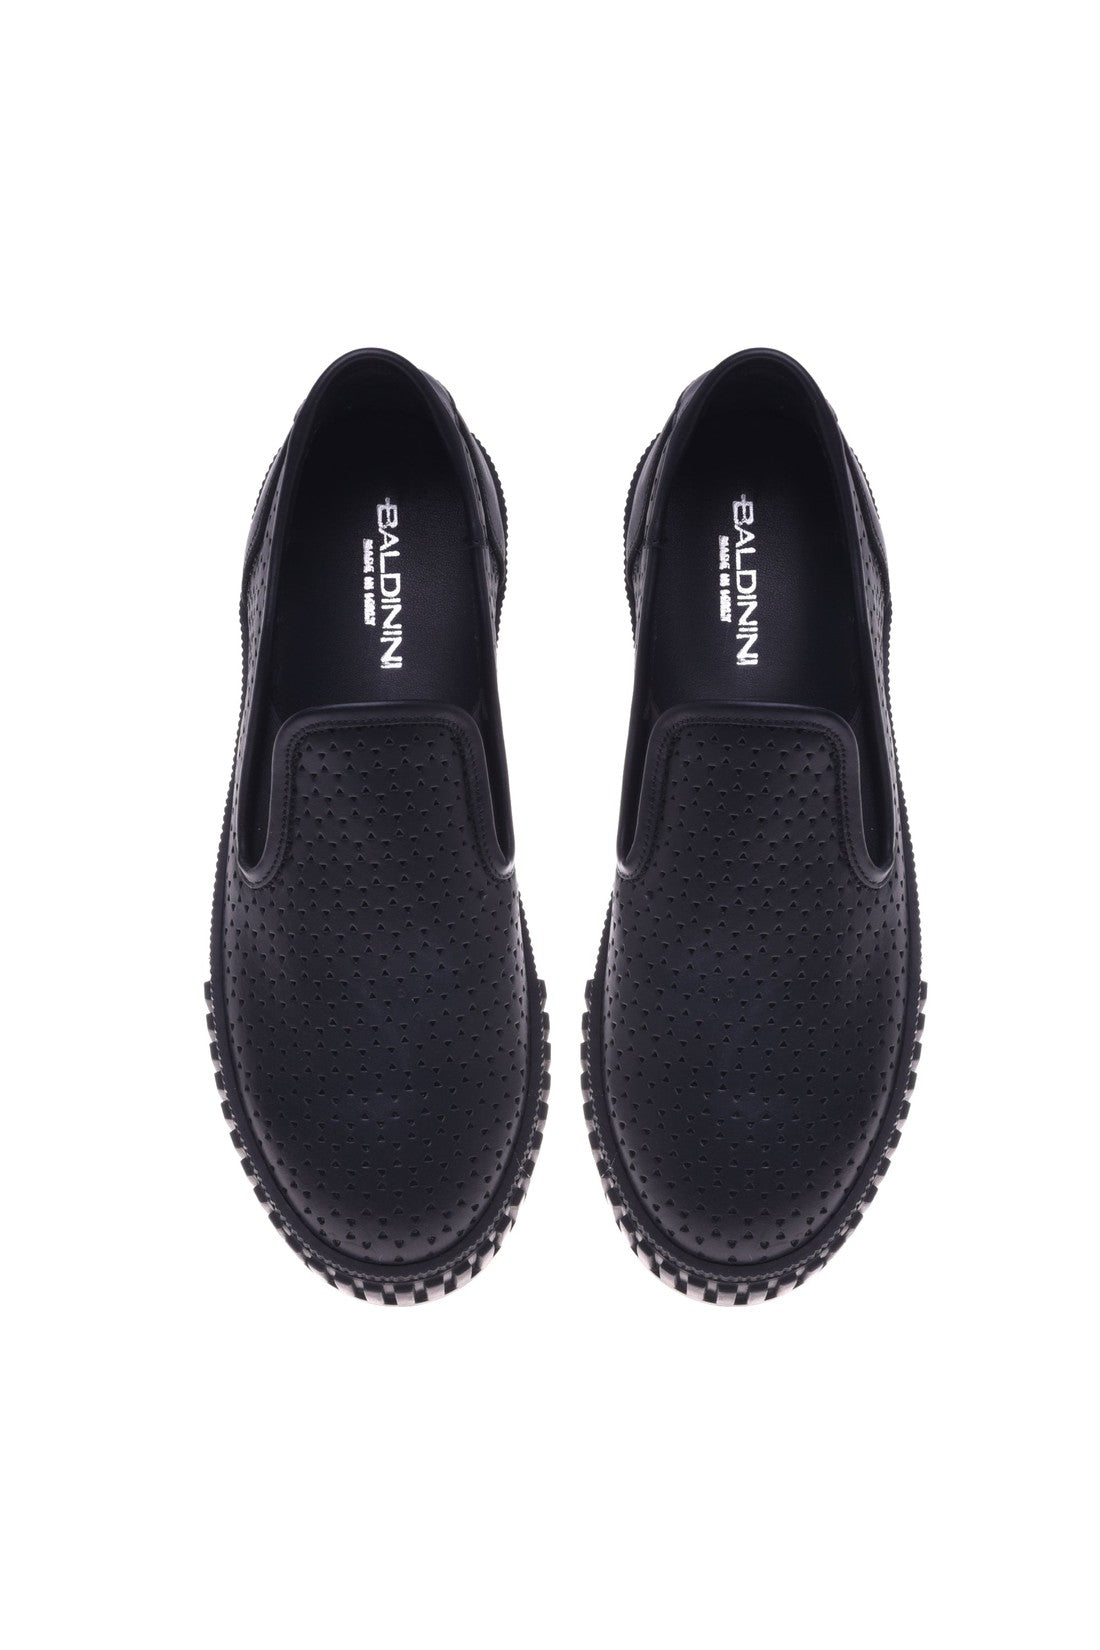 Loafer in black perforated nappa leather